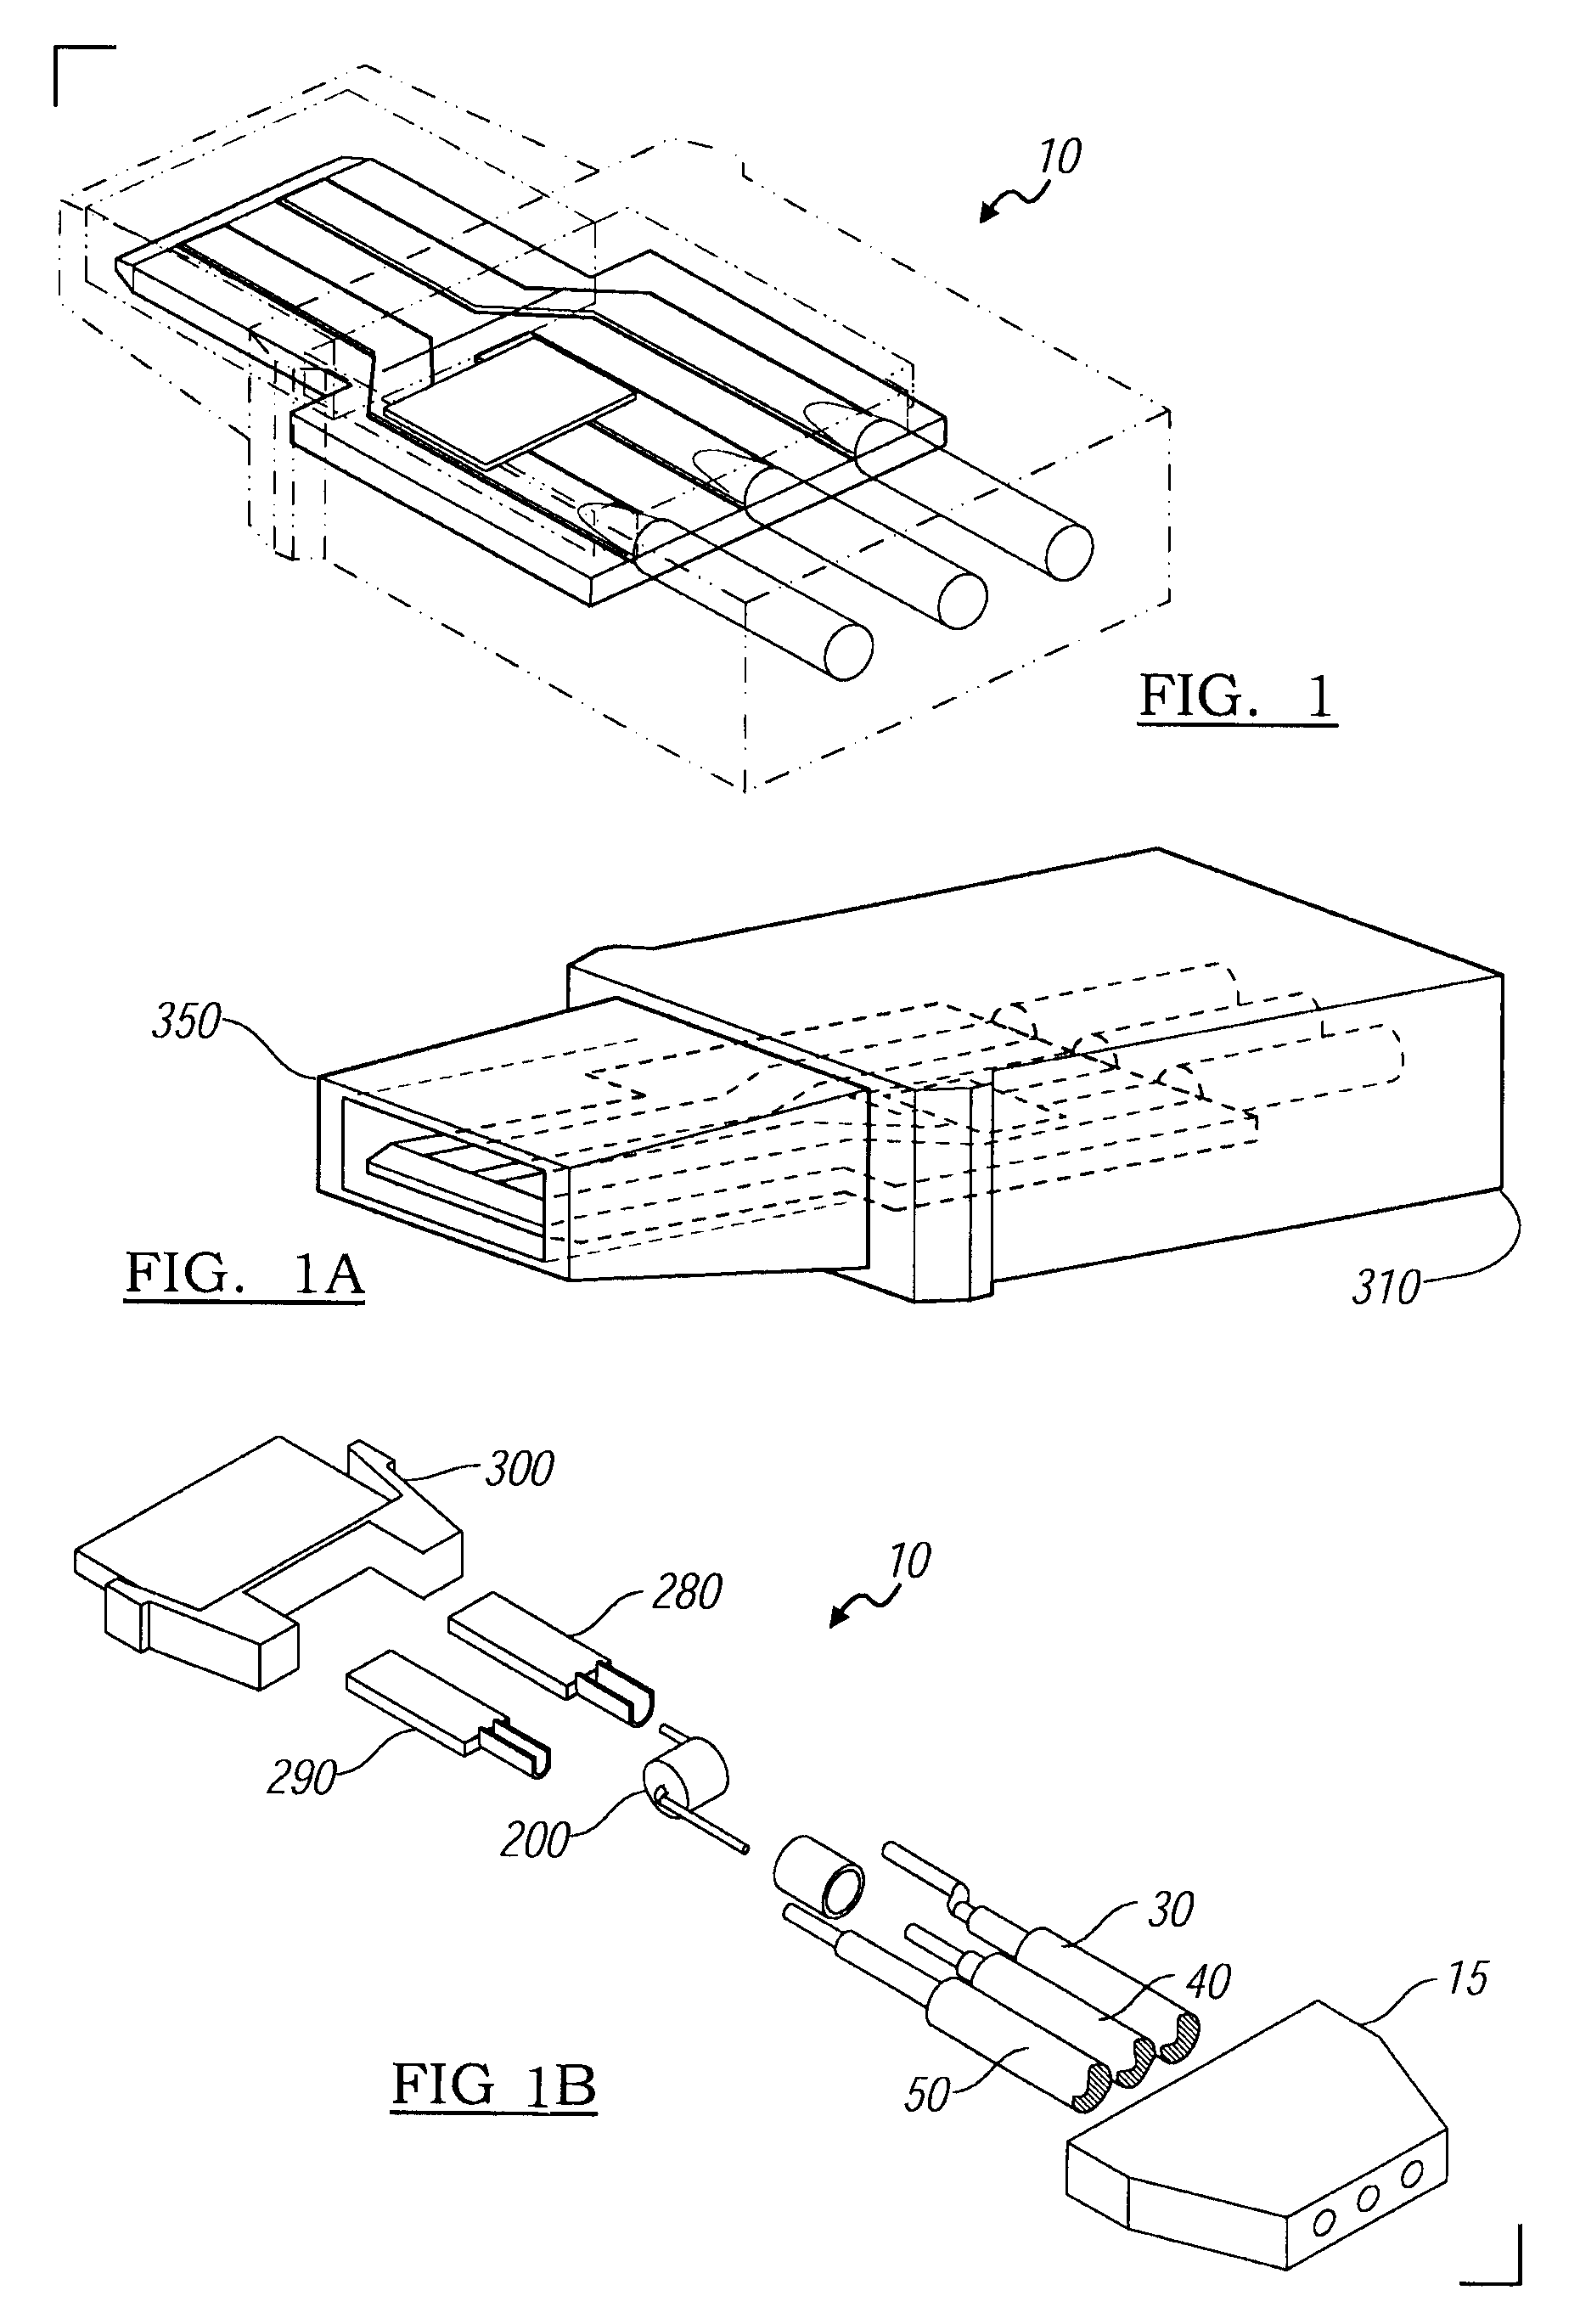 Photovoltaic roofing tile with a plug and socket on 2 opposite edges